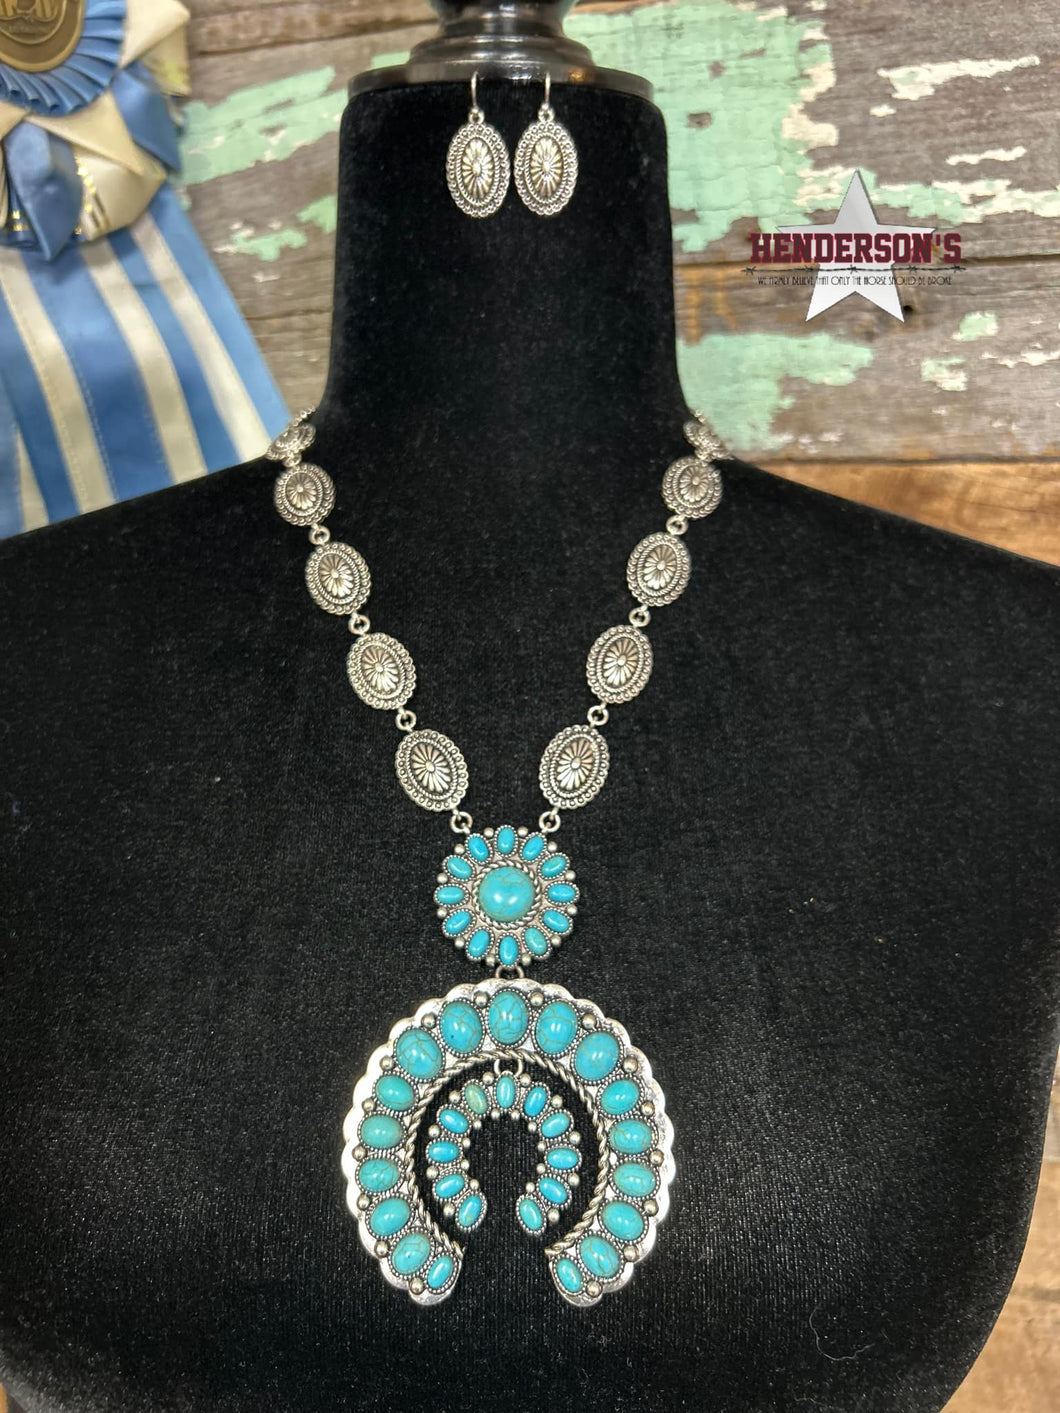 Western Squash Blossom & Concho Necklace Set - Henderson's Western Store